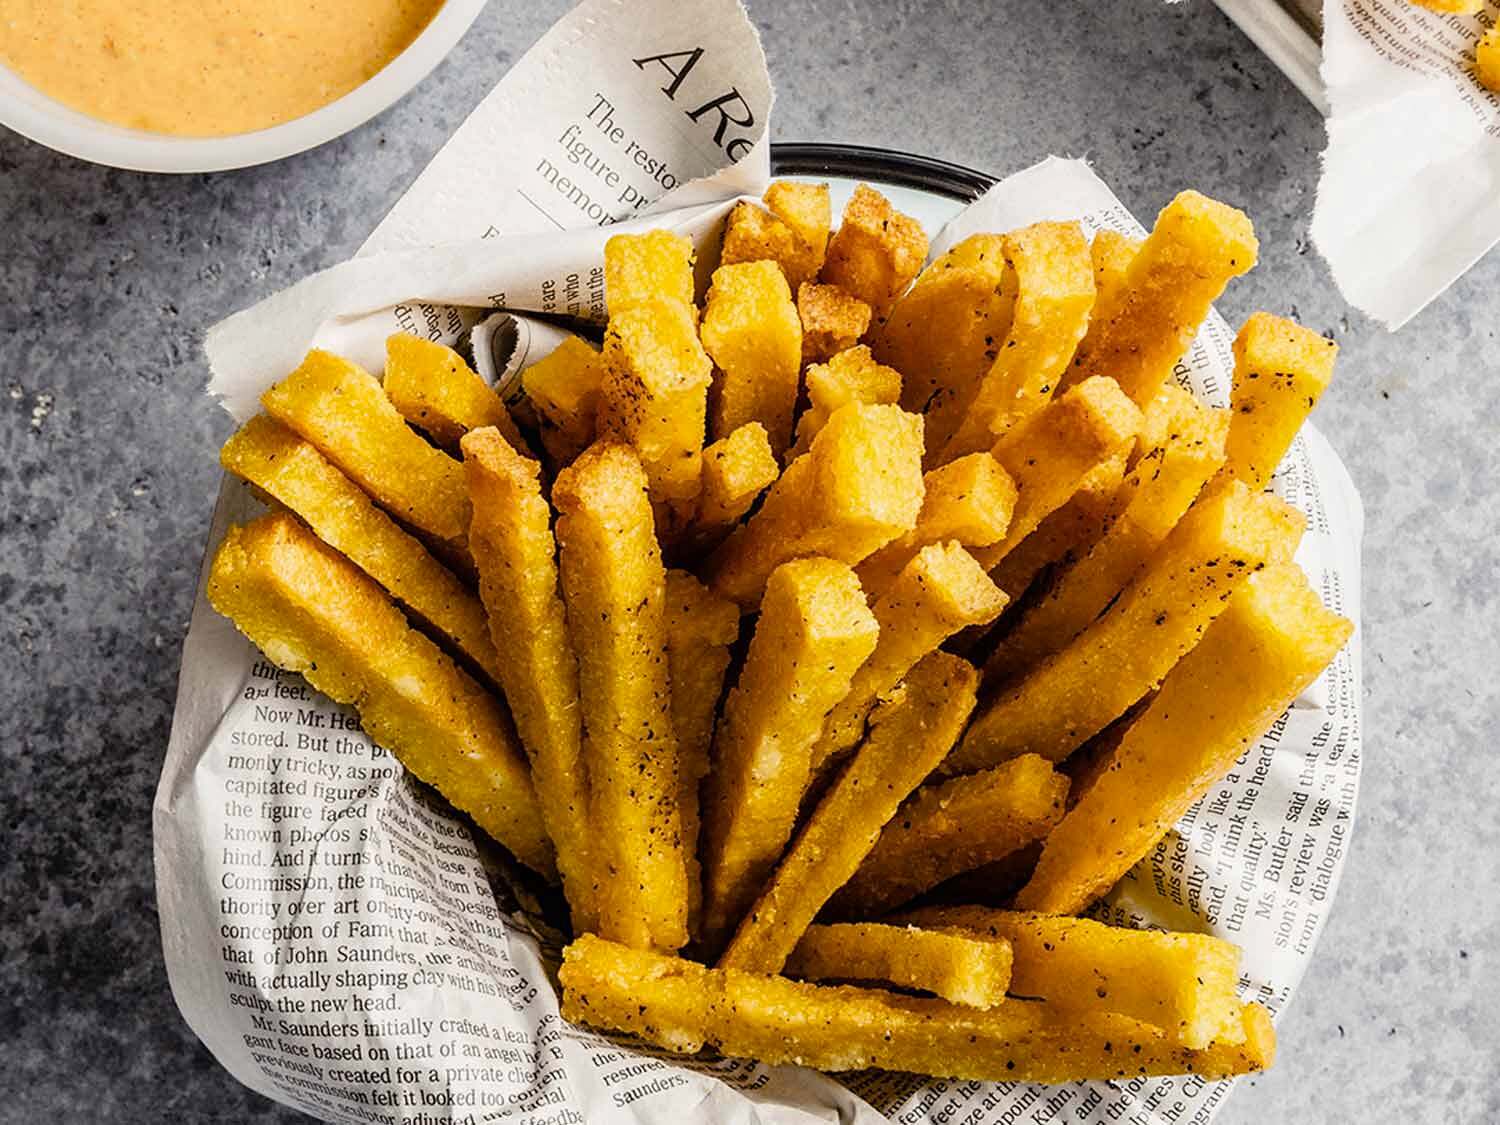 Polenta Fries with Cheesy Chipotle Dipping Sauce